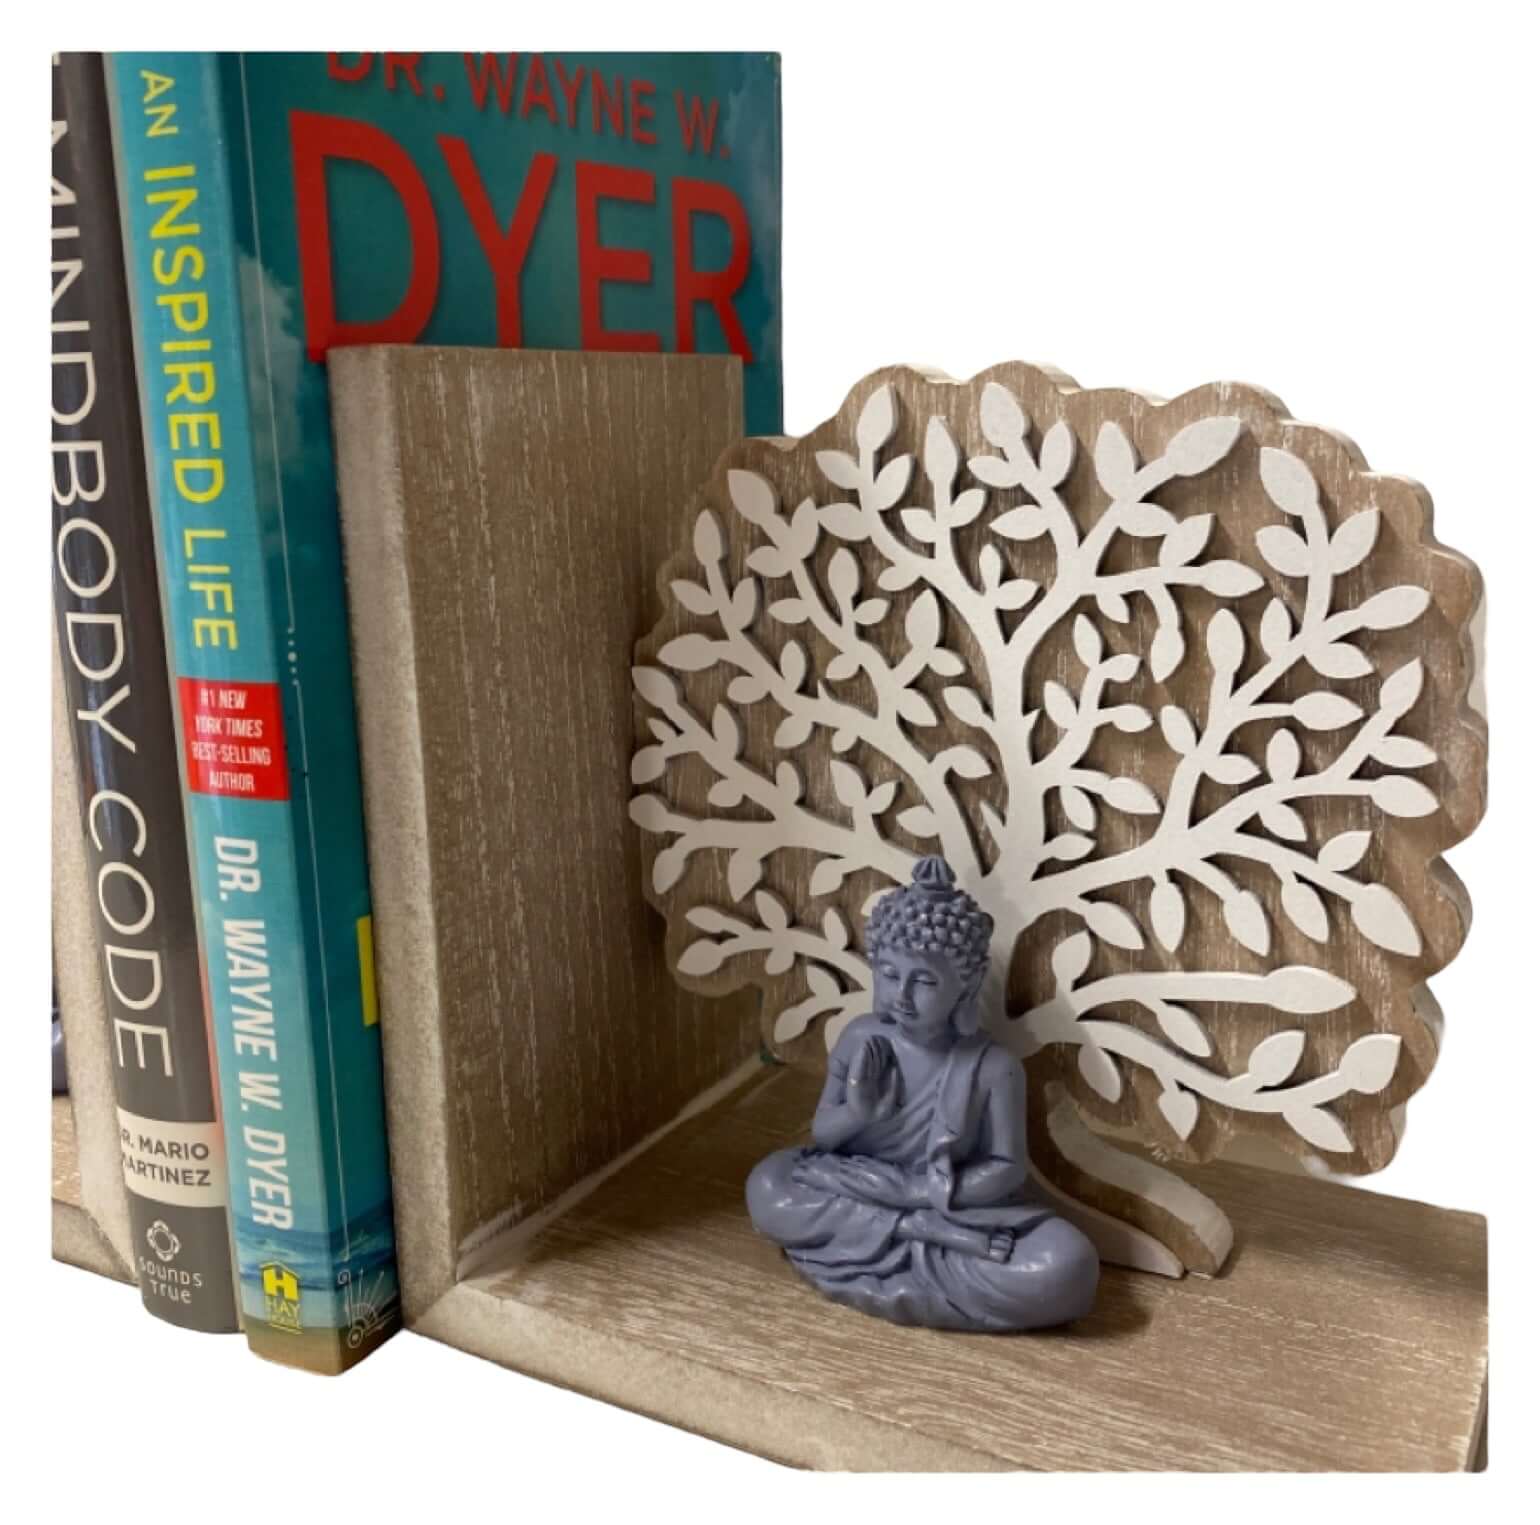 Book Ends Bookend Buddha Tree of Life - The Renmy Store Homewares & Gifts 